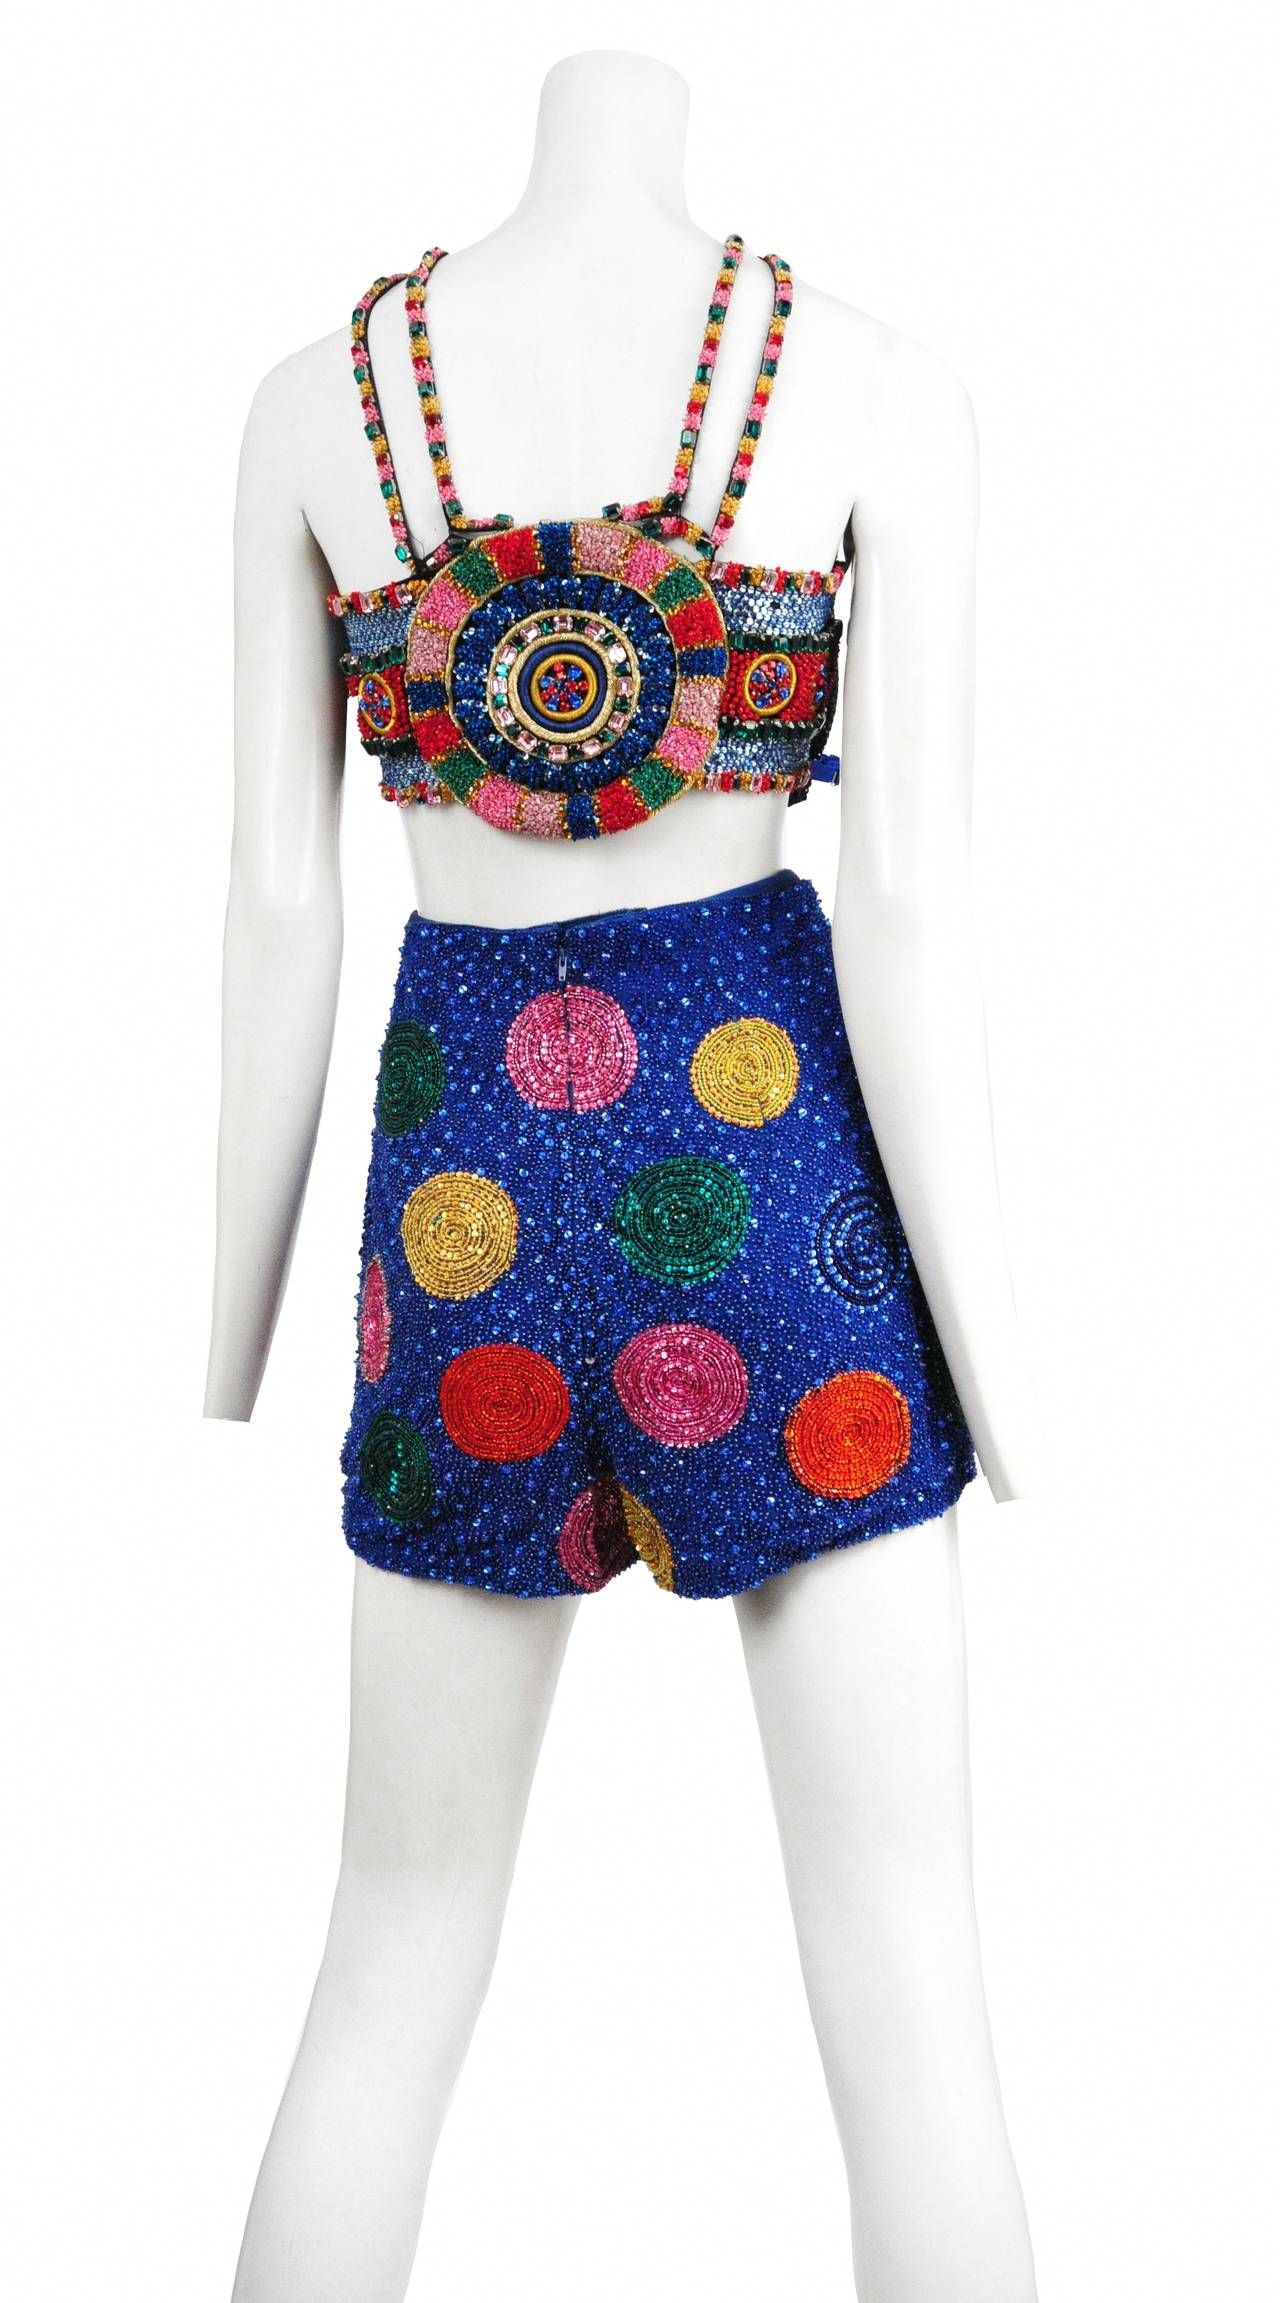 Vintage Gianni Versace fully encrusted beaded phoenix top and corresponding beaded high waisted shorts.